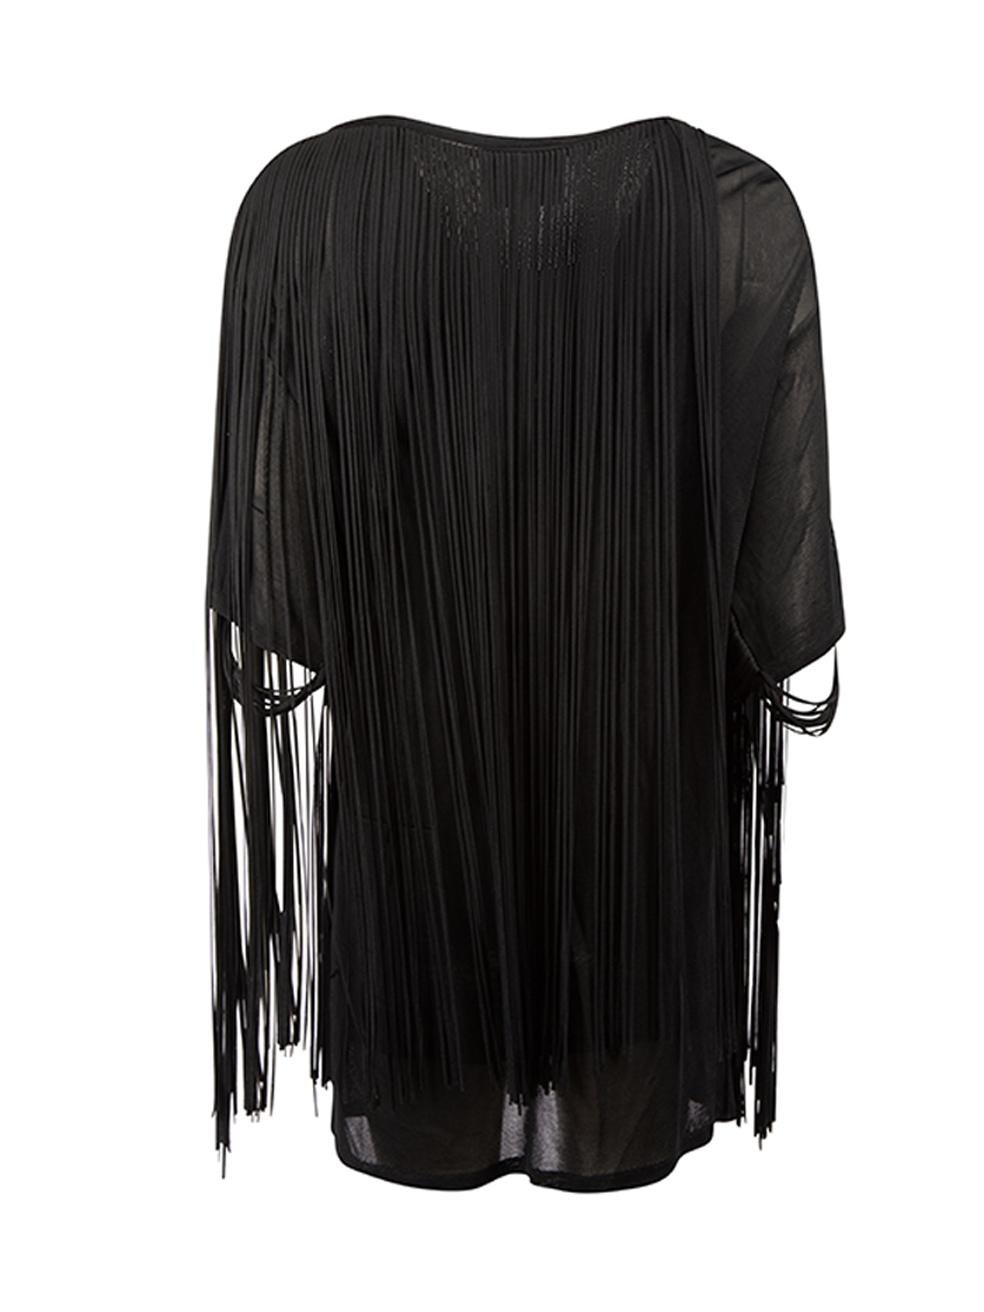 3.1 Phillip Lim Women's Black Fringed Short Sleeves Dress In Good Condition In London, GB